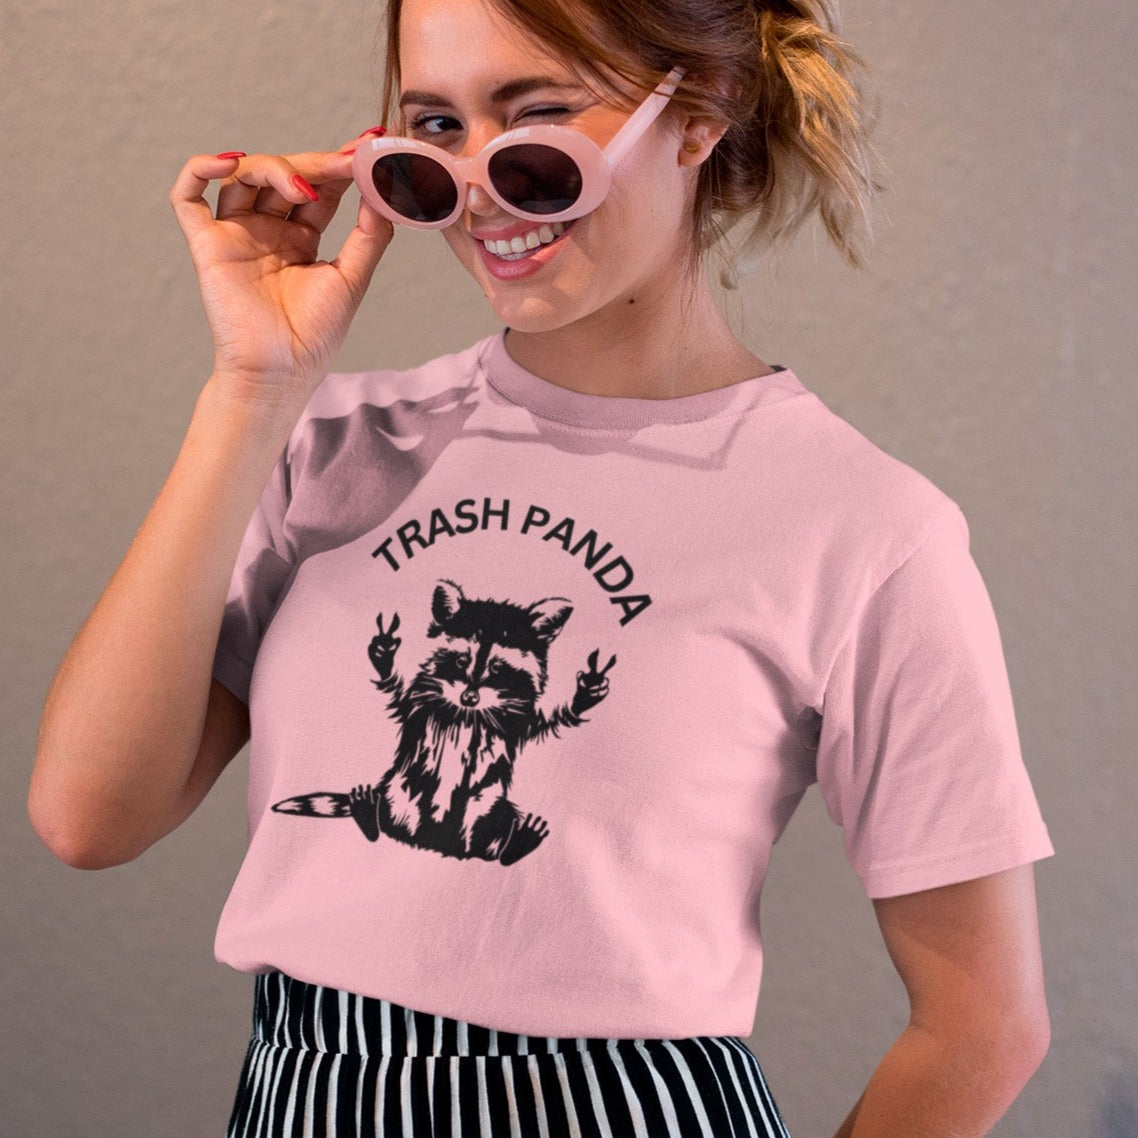 trash-panda-racoon-pink-t-shirt-unisex-tee-mockup-of-a-girl-with-cool-sunglasses-winking